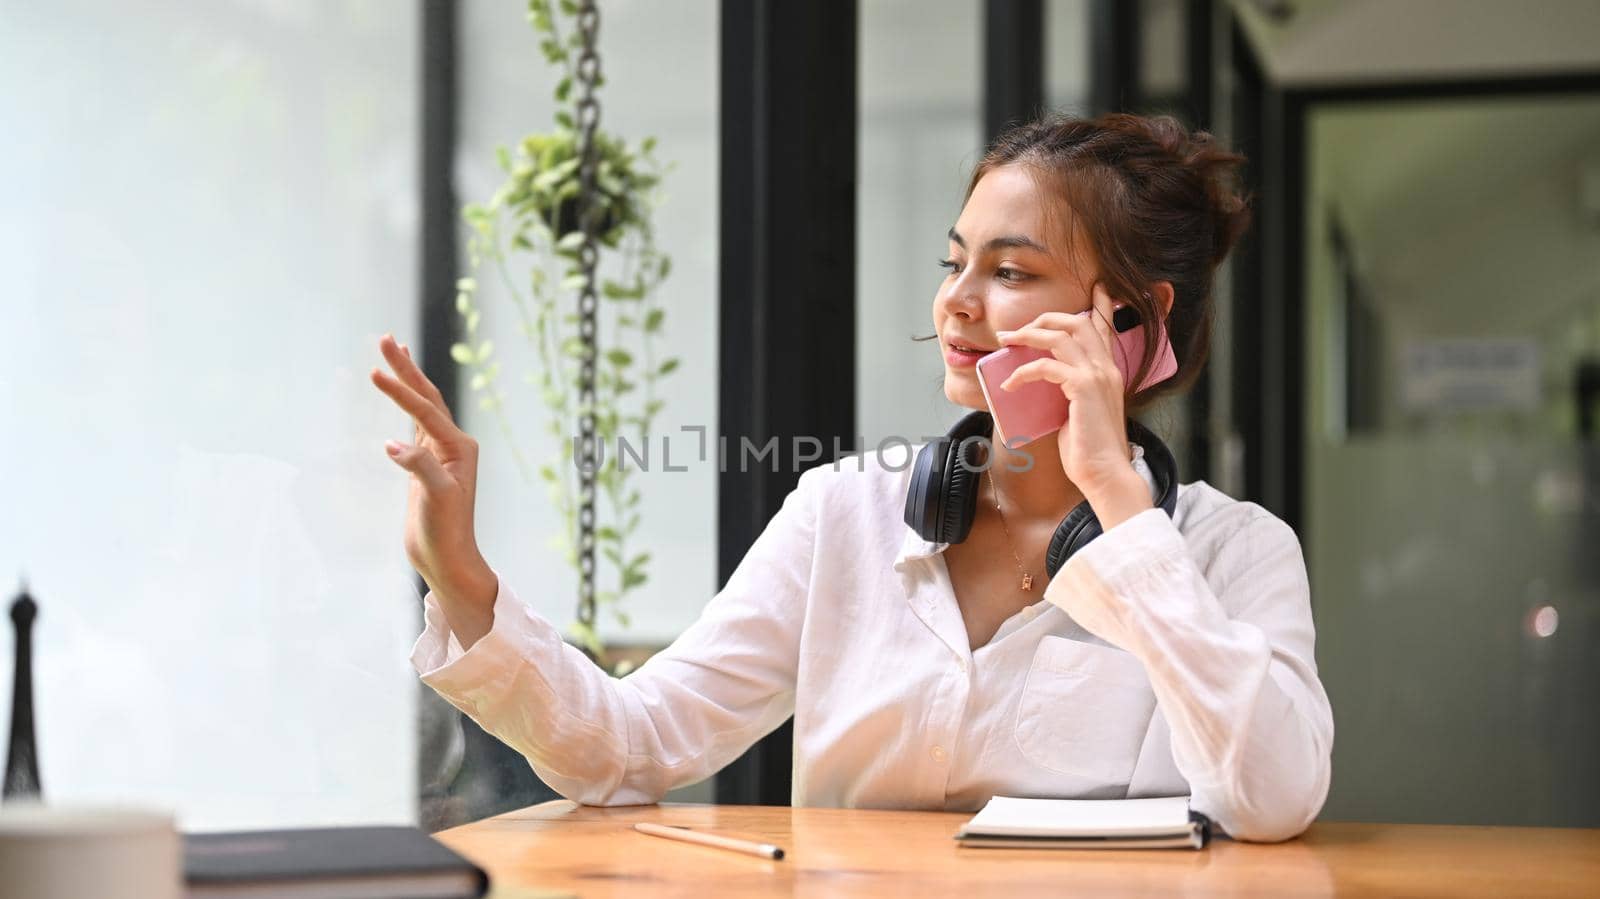 Charming young woman having talking conversation on mobile phone while sitting in coffee shop.